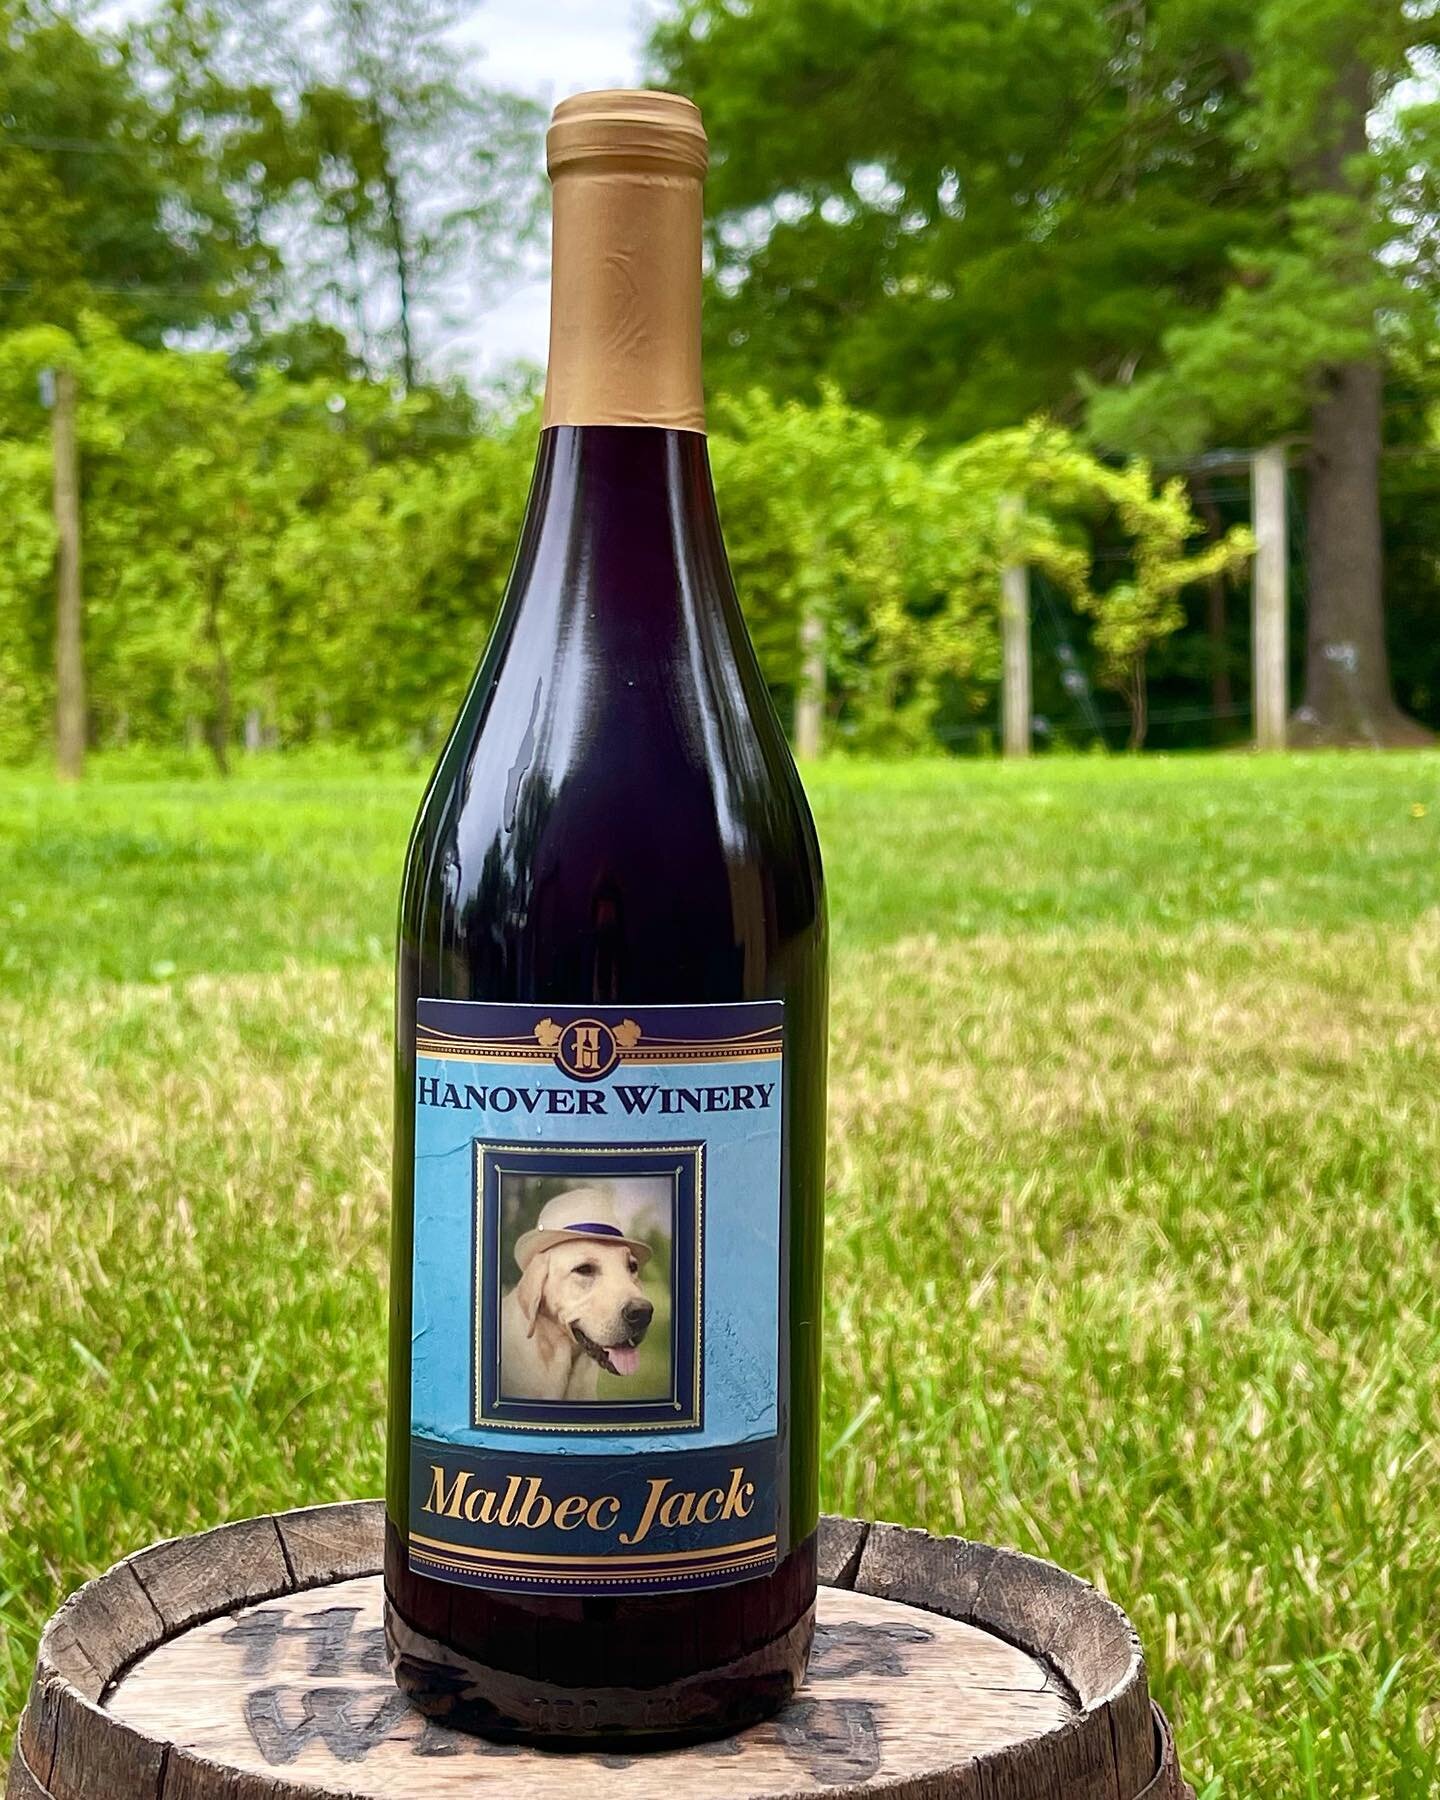 Malbec Jack! 
Excellent 2021 Malbec wine available 7/29/22
Named after our rescue pup Jack Martin ❤️
#malbec #rescuedogsofinstagram #cincinnatilabrescue #ohiowinery #ohiofindithere